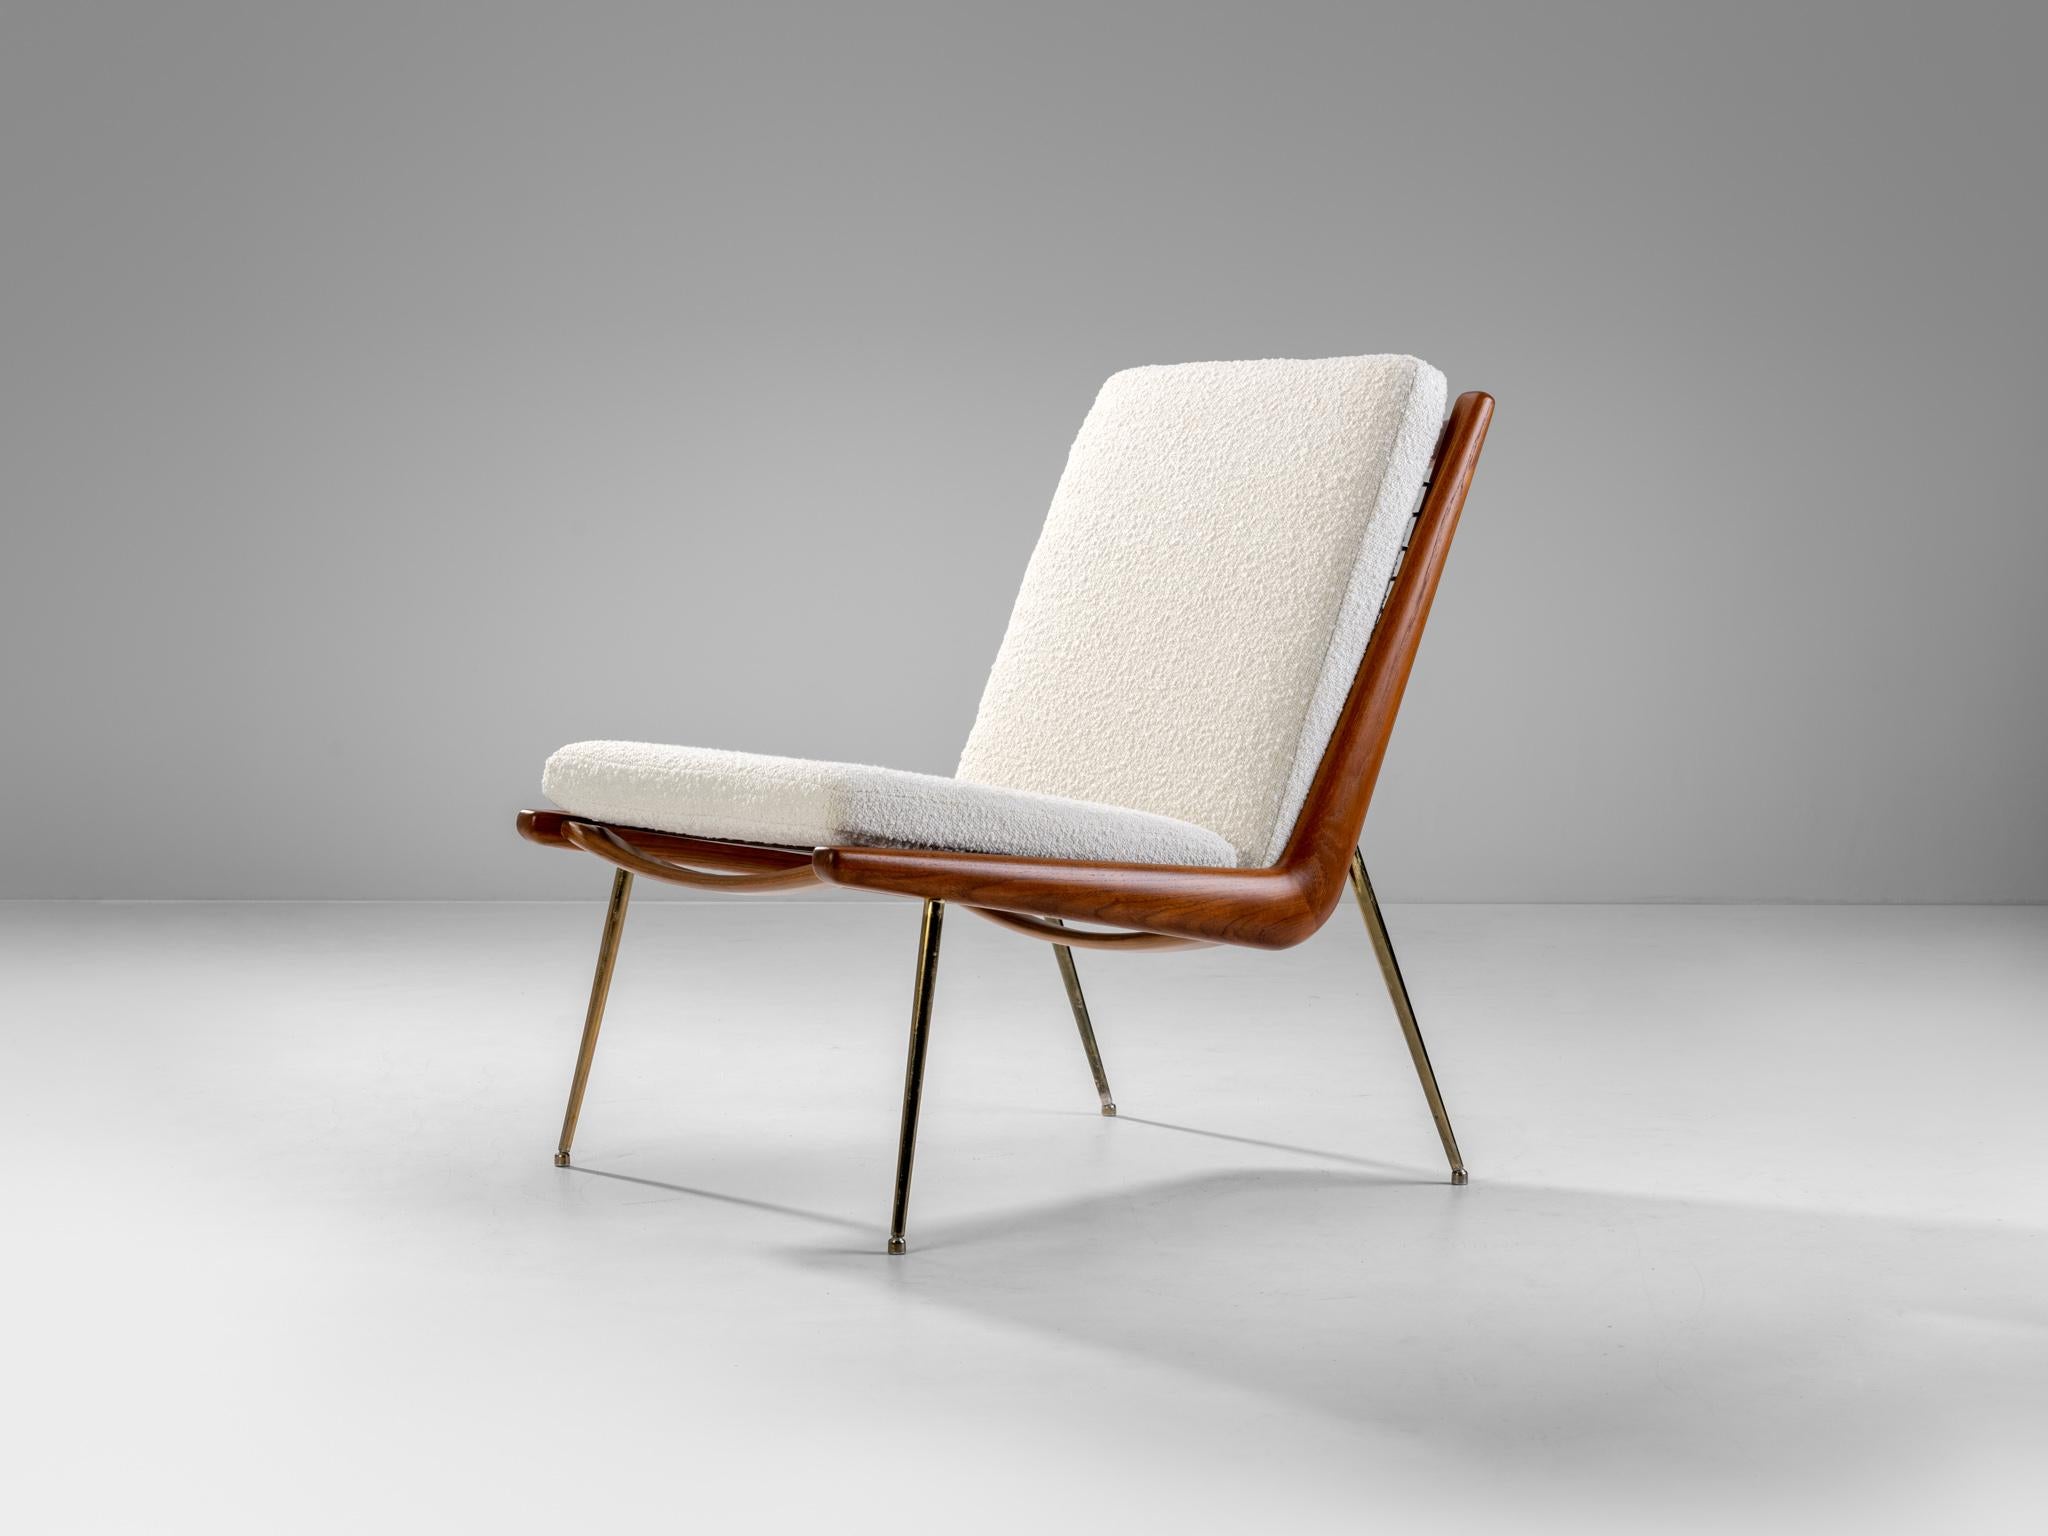 The Boomerang chair is one of the most elegant chair designs of the Mid Century period and it was designed by Architects Peter Hvidt & Orla Molgaard Nielsen in 1954 and this particular example was produced by France & Son.

The Teak frame was